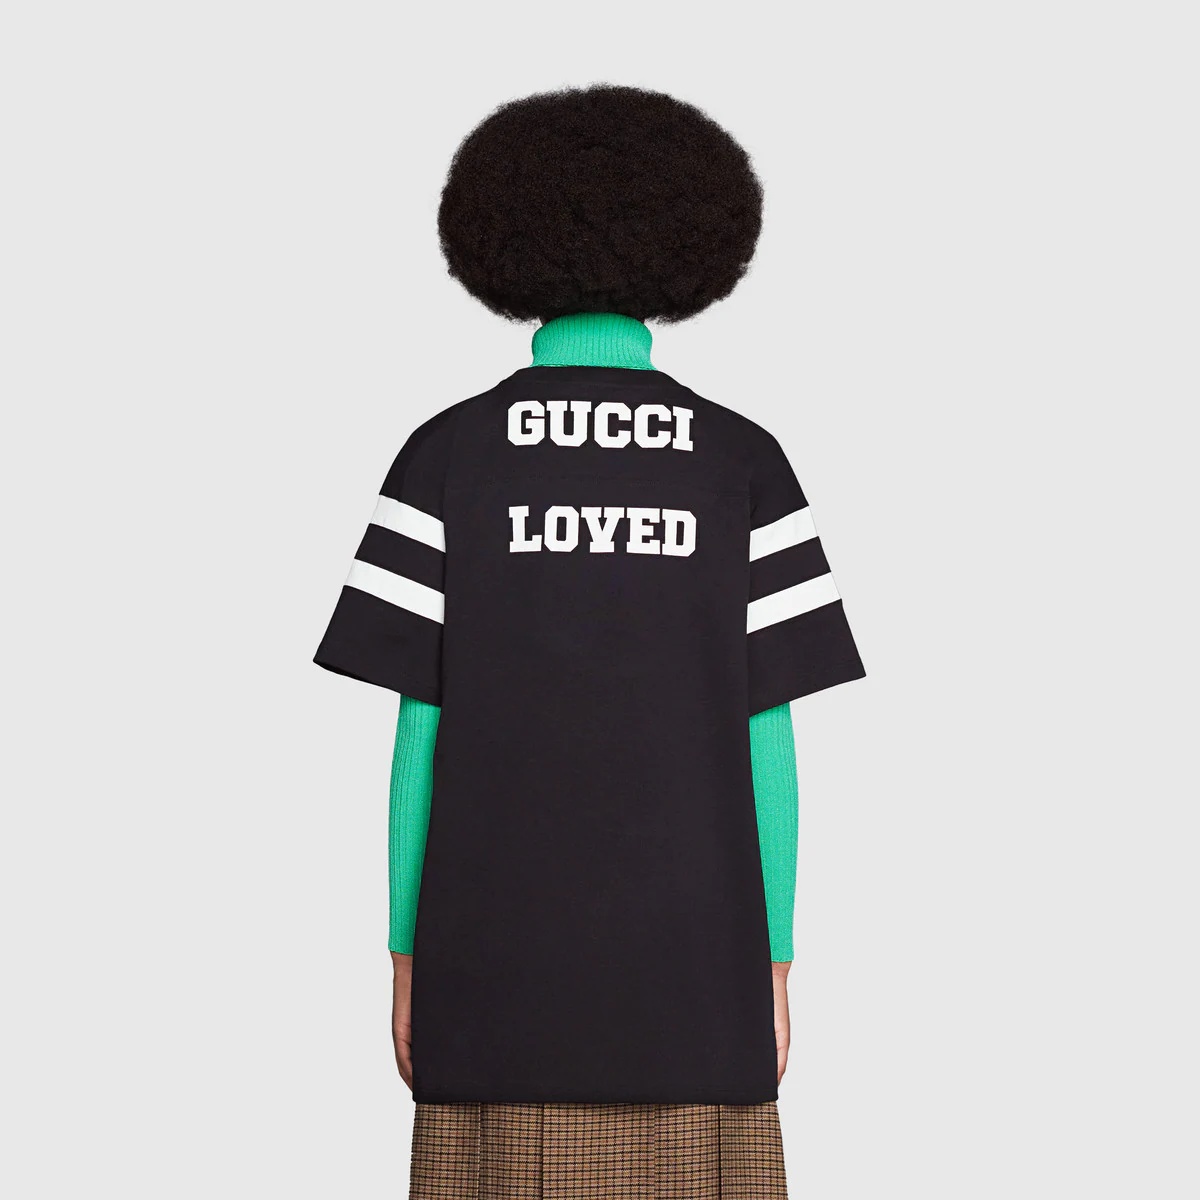 GUCCI '25 Gucci Eschatology and Gucci Loved' T-shirt | REVERSIBLE